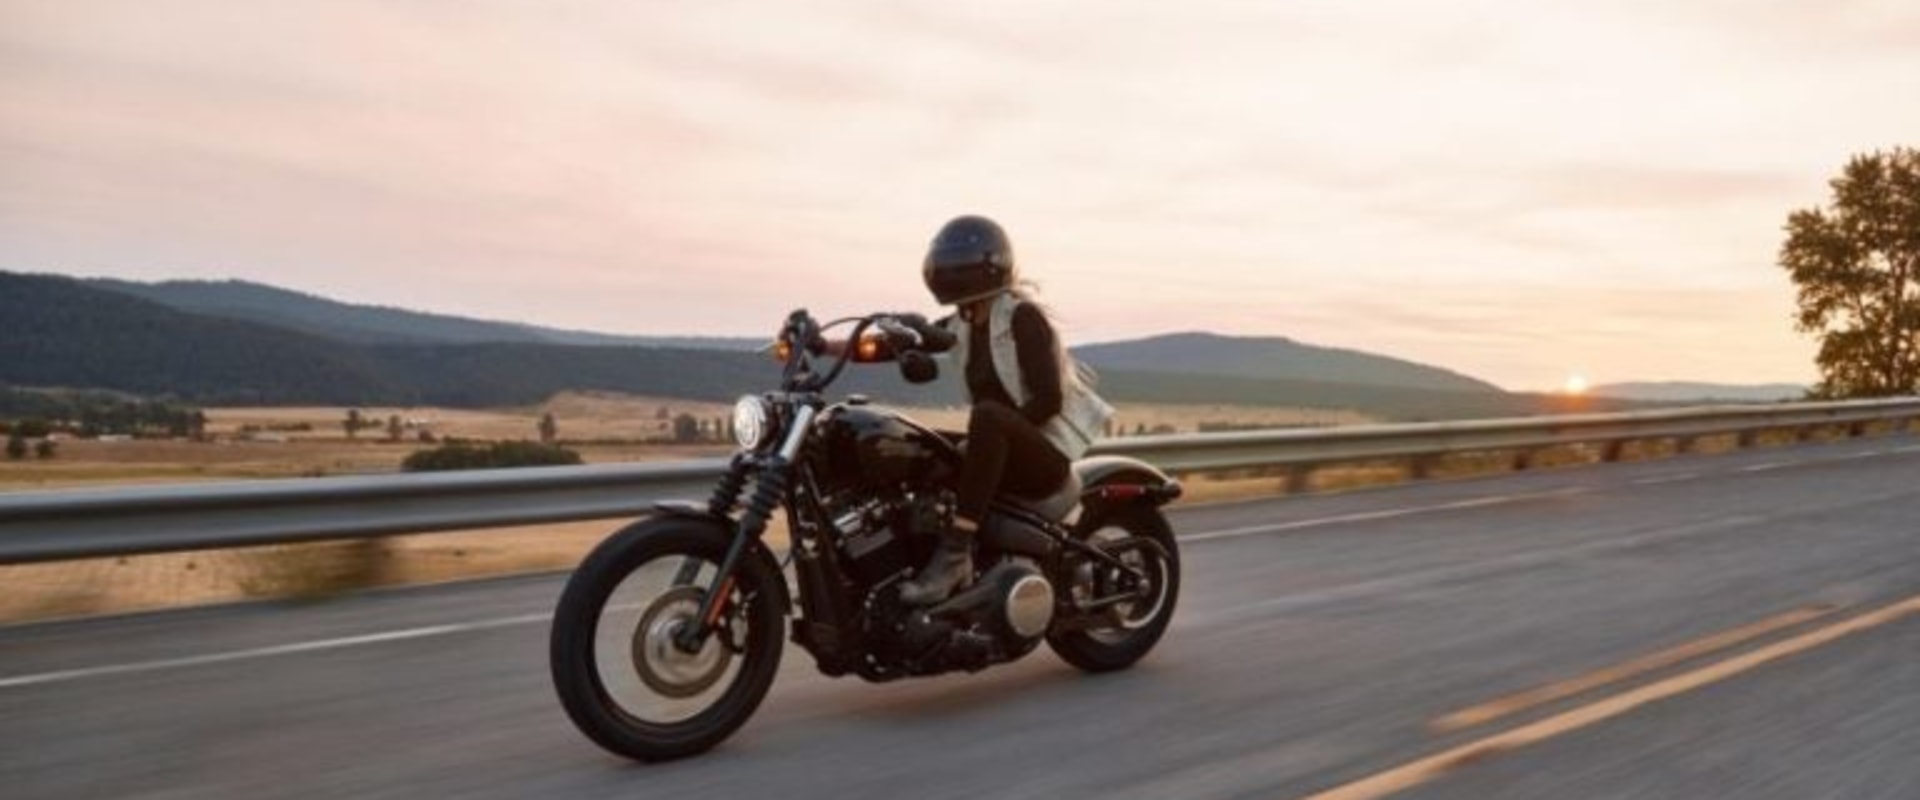 How Much Does Motorcycle Insurance Cost With Esurance?